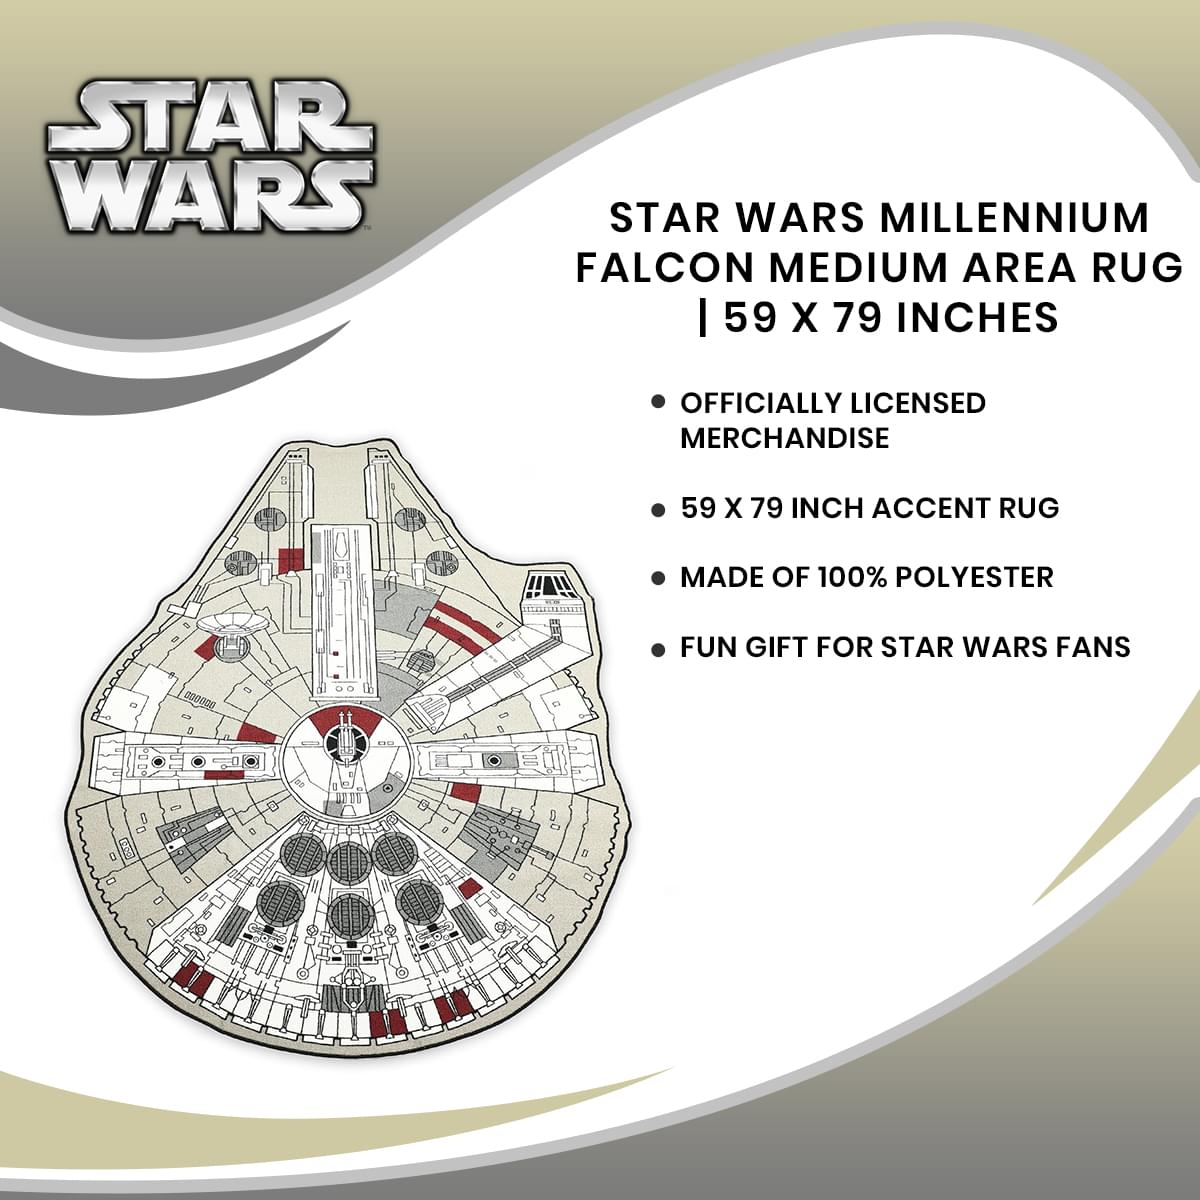 Star Wars Large Millennium Falcon Entry or Area Rug, 59" L x 79" W - image 7 of 7